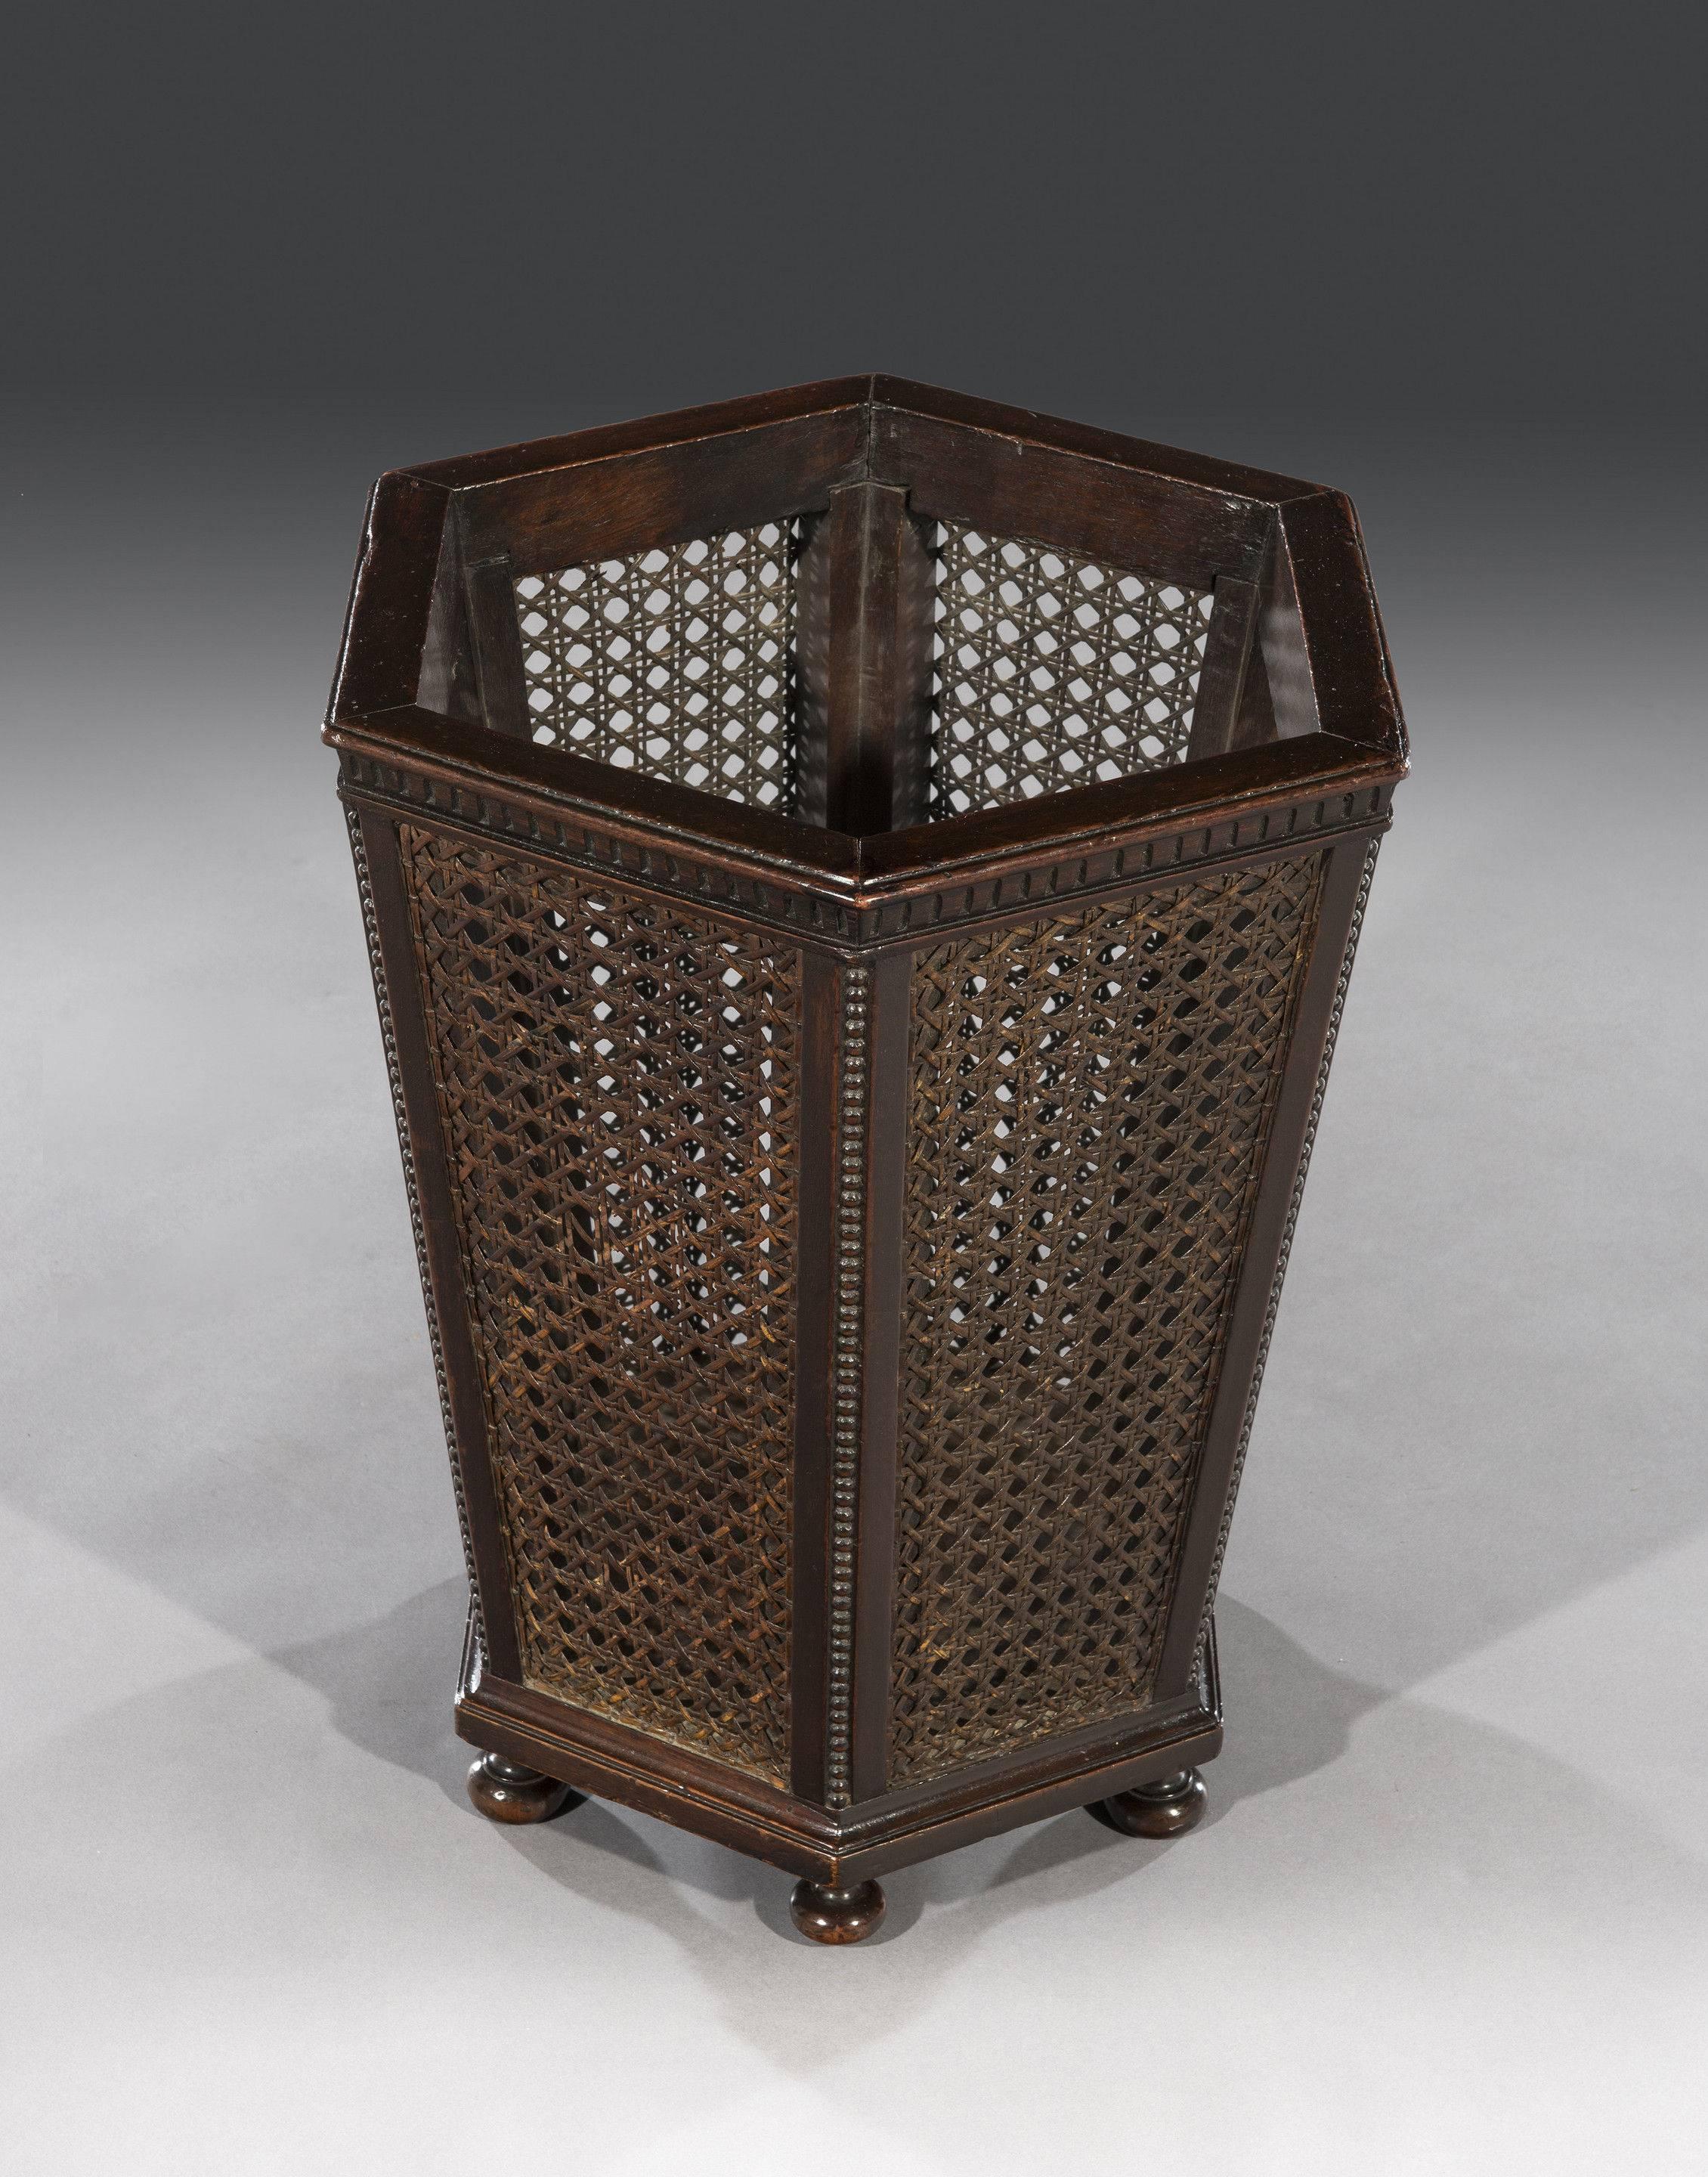 The octagonal mahogany waste paper basket has etched markings above caned panelled sides and mahogany upright supports with bobbin mouldings. The waste paper basket stands on turned mahogany bun feet.